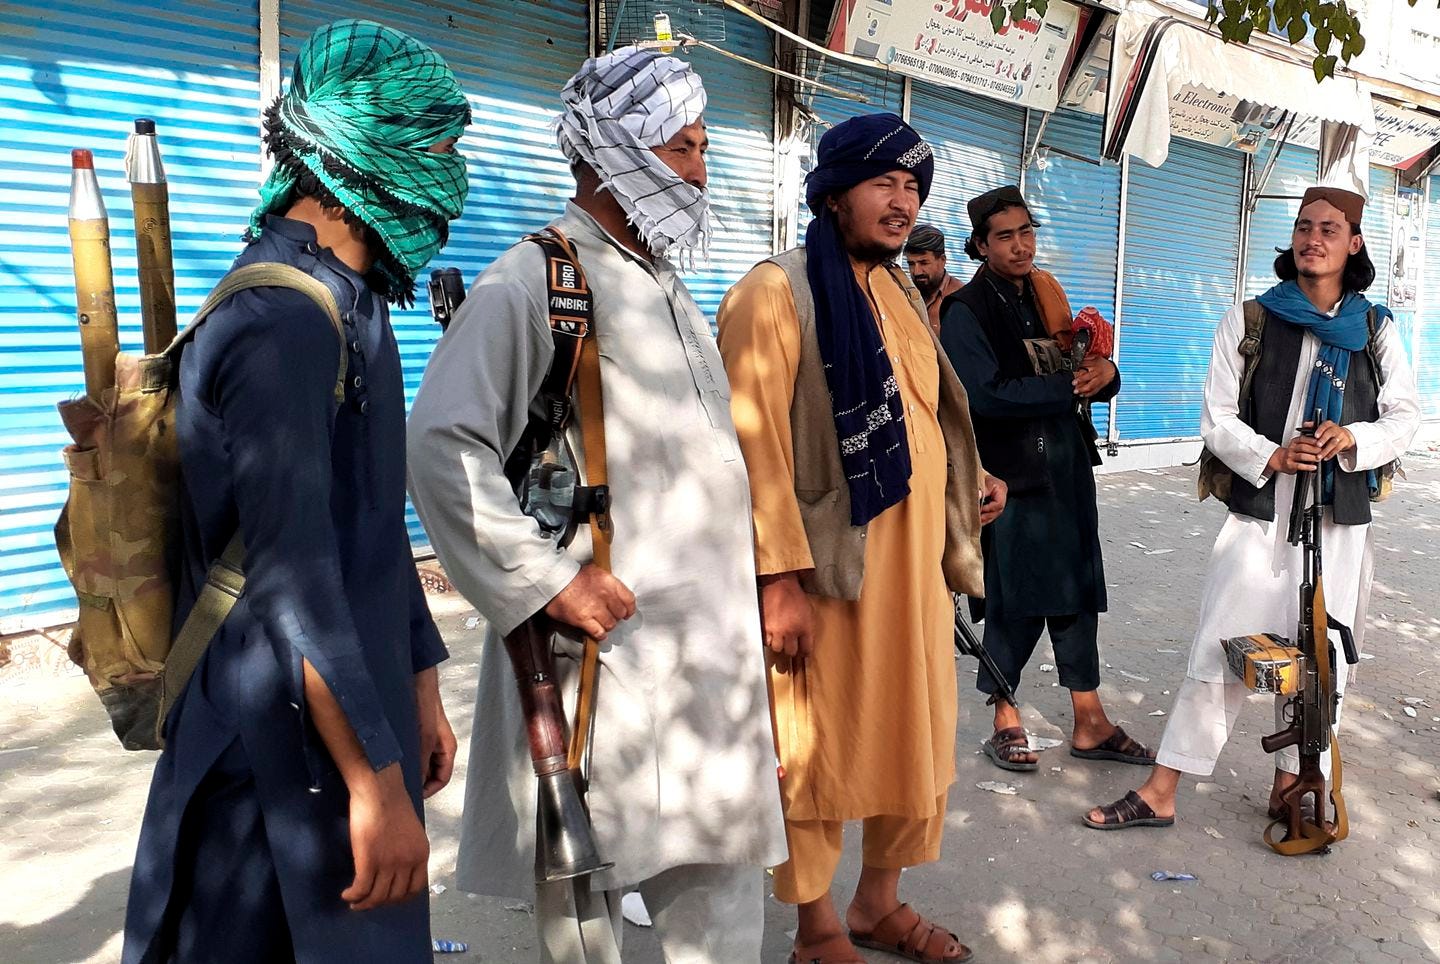 Taliban fighters stood guard in Kunduz city, northern Afghanistan on Monday. The militants have ramped up their push across much of Afghanistan in recent weeks, turning their guns on provincial capitals after taking district after district and large swaths of land in the mostly rural countryside.